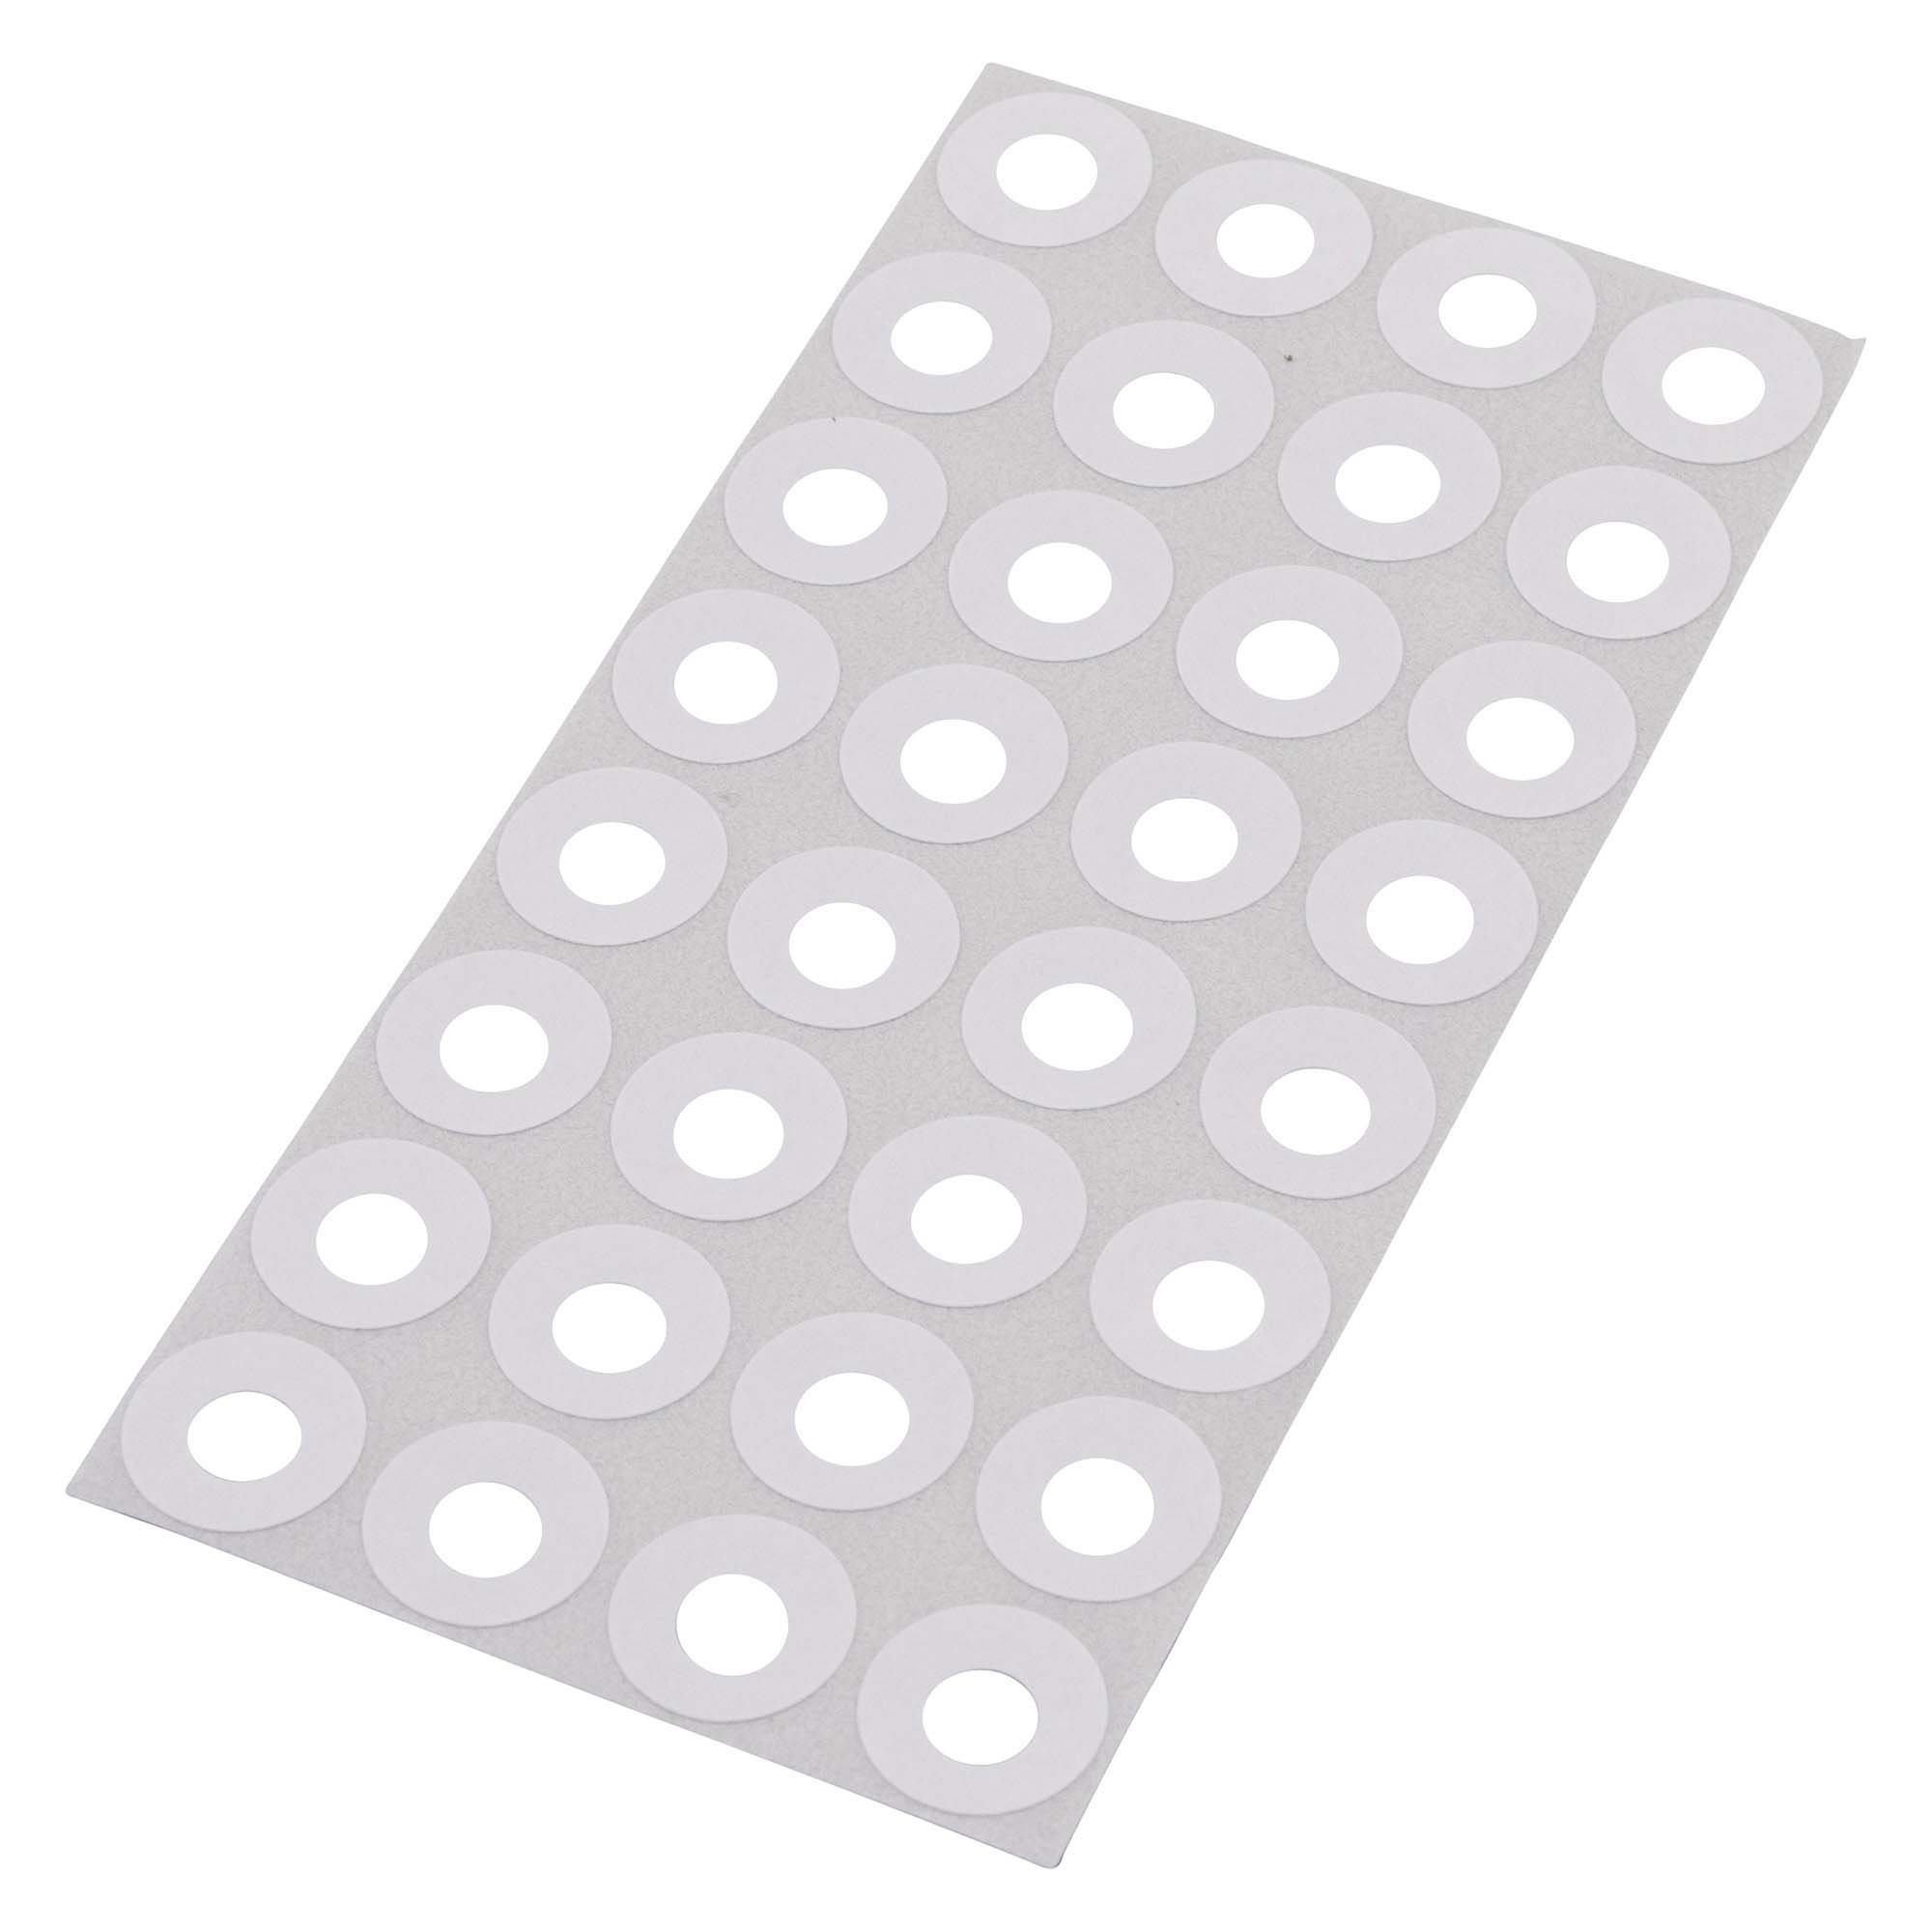 2 Box 500 Pack 0.25 Inch Hole Reinforcement Labels, Self-Adhesive  Reinforcement Ring Labels for Repairing and Strengthening Punch Holes  (White+Clear)